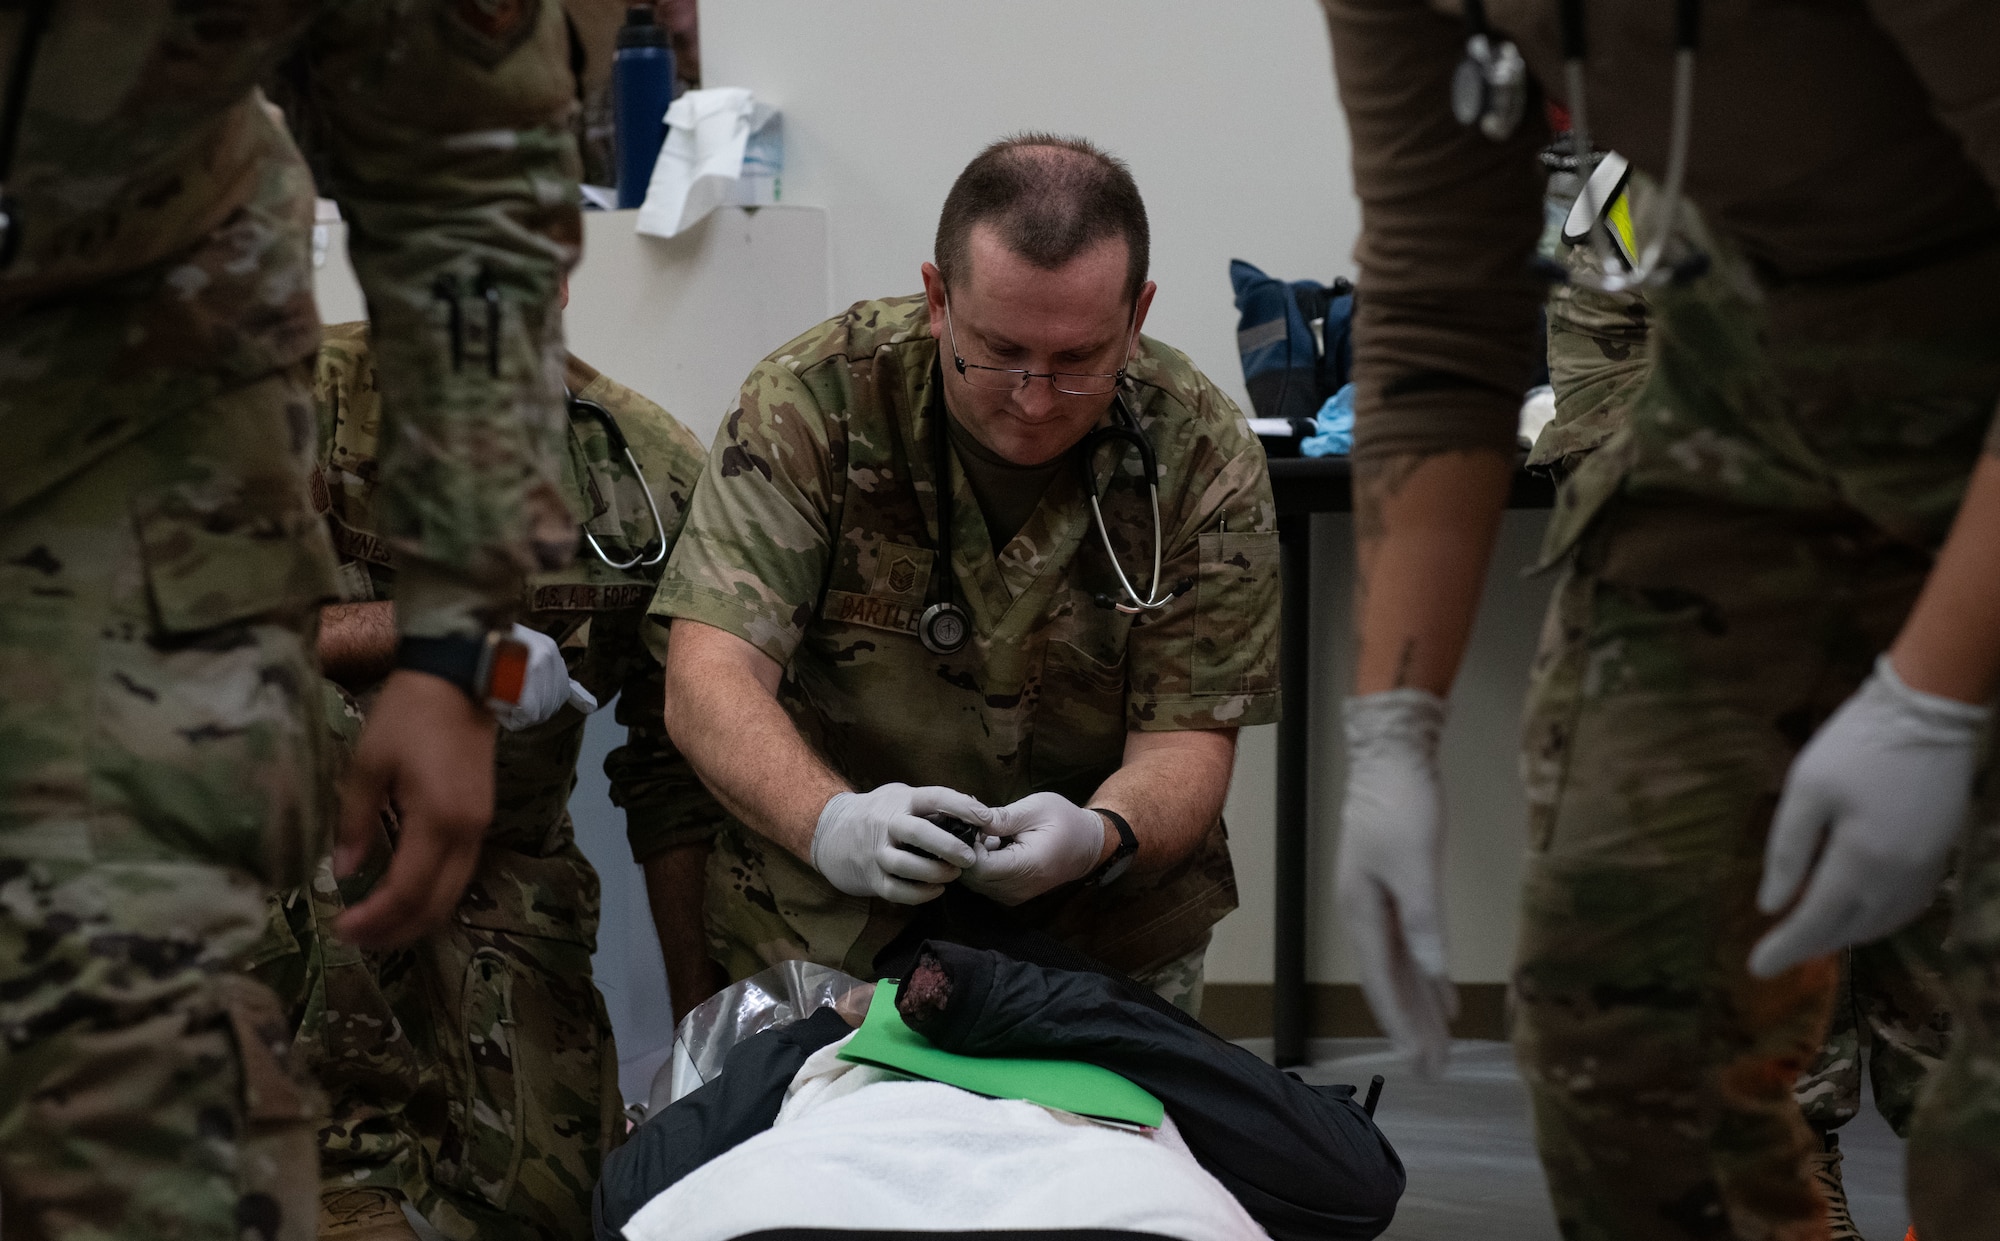 Joint Base Charleston Airmen participate in a medical exercise where they act as patients with simulated wounds. Medical Group staff wear protective hear as they treat the simulated patients.